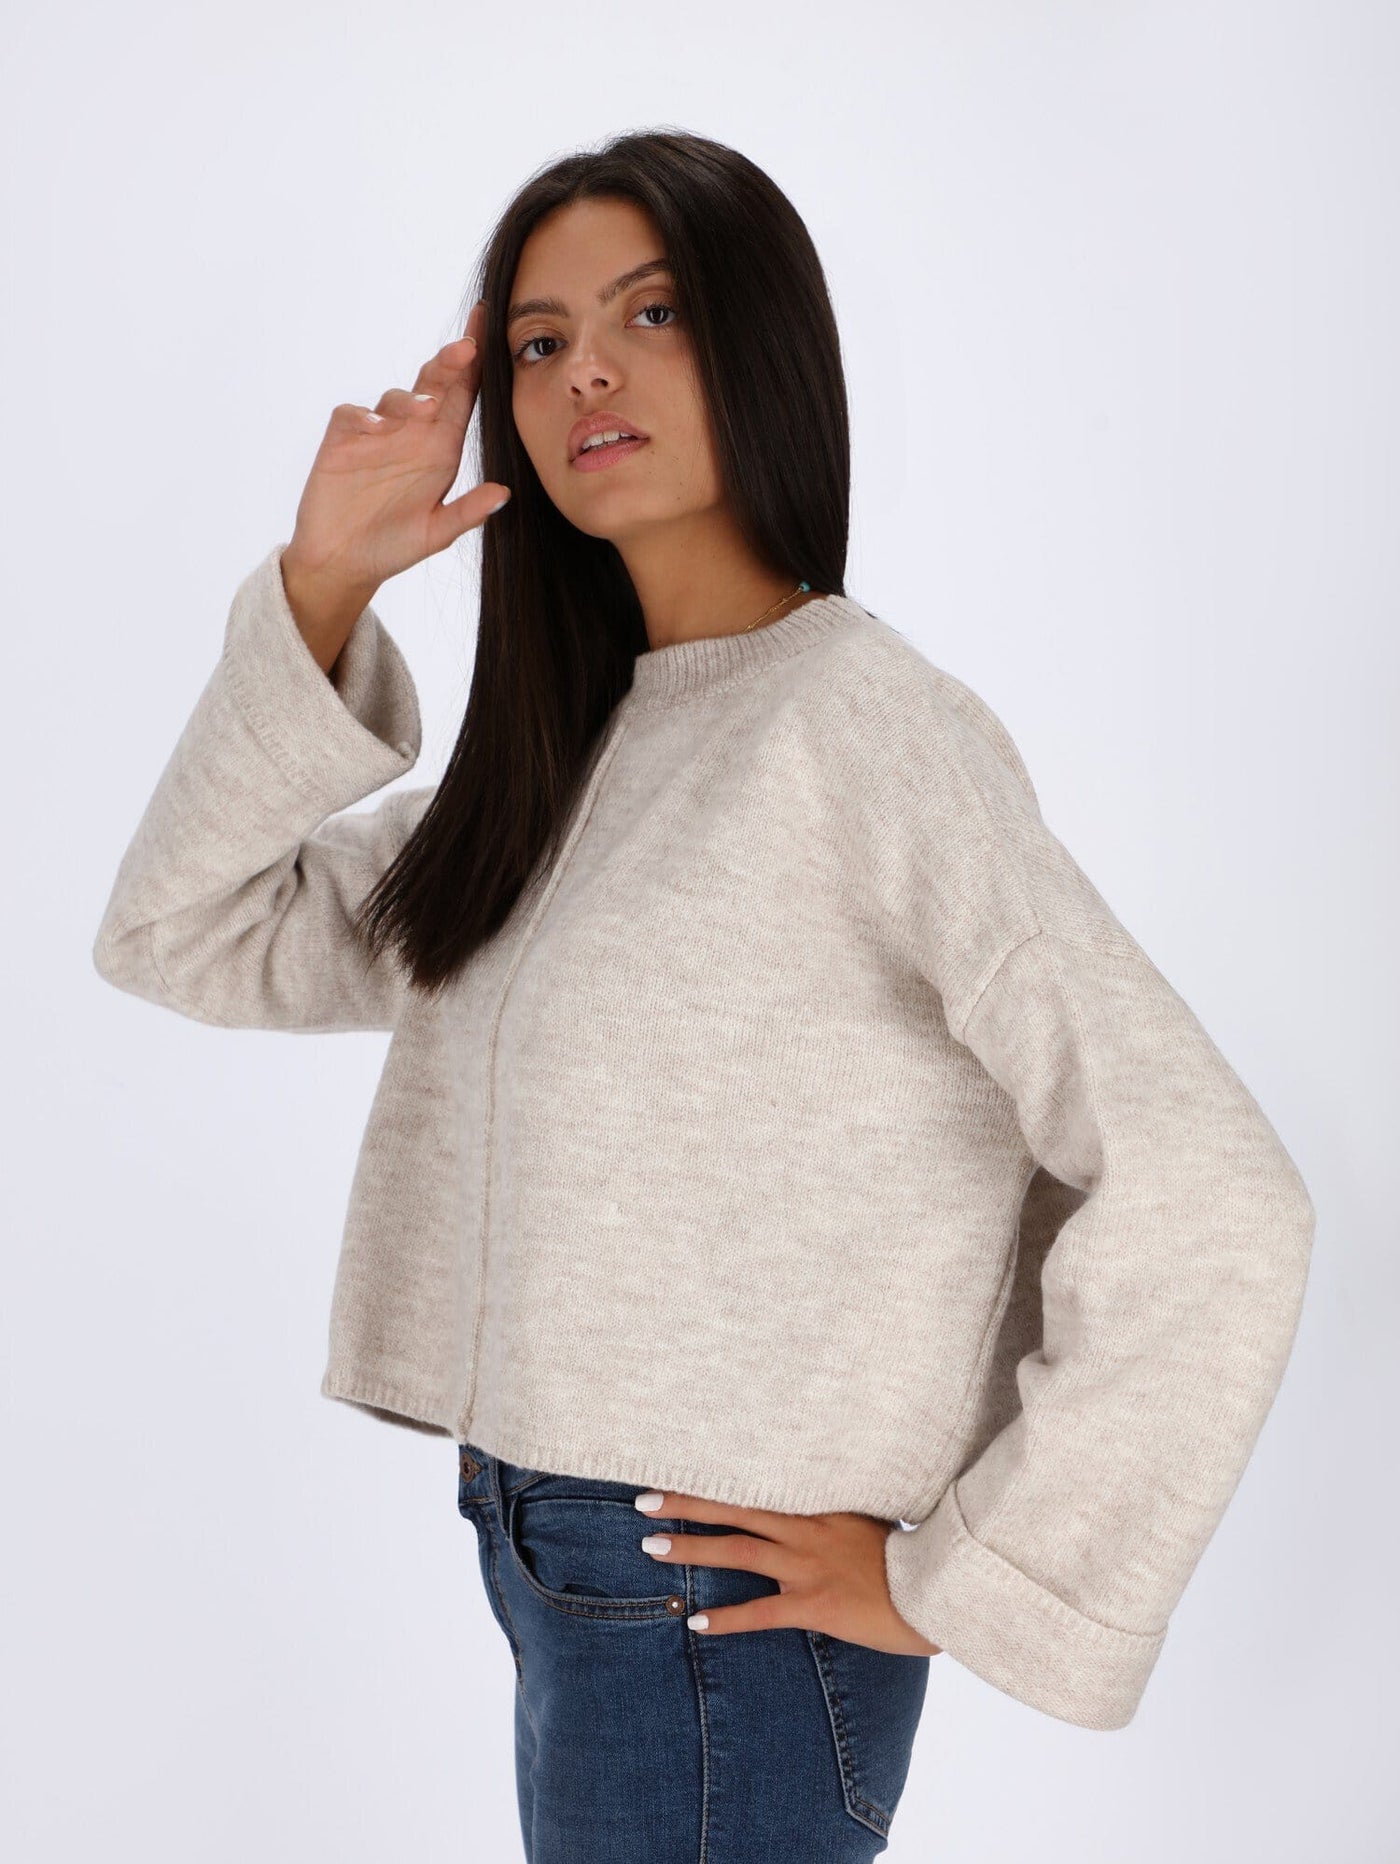 OR Knitwear Beige Chine / L/XL Cropped Plain Knit Pullover